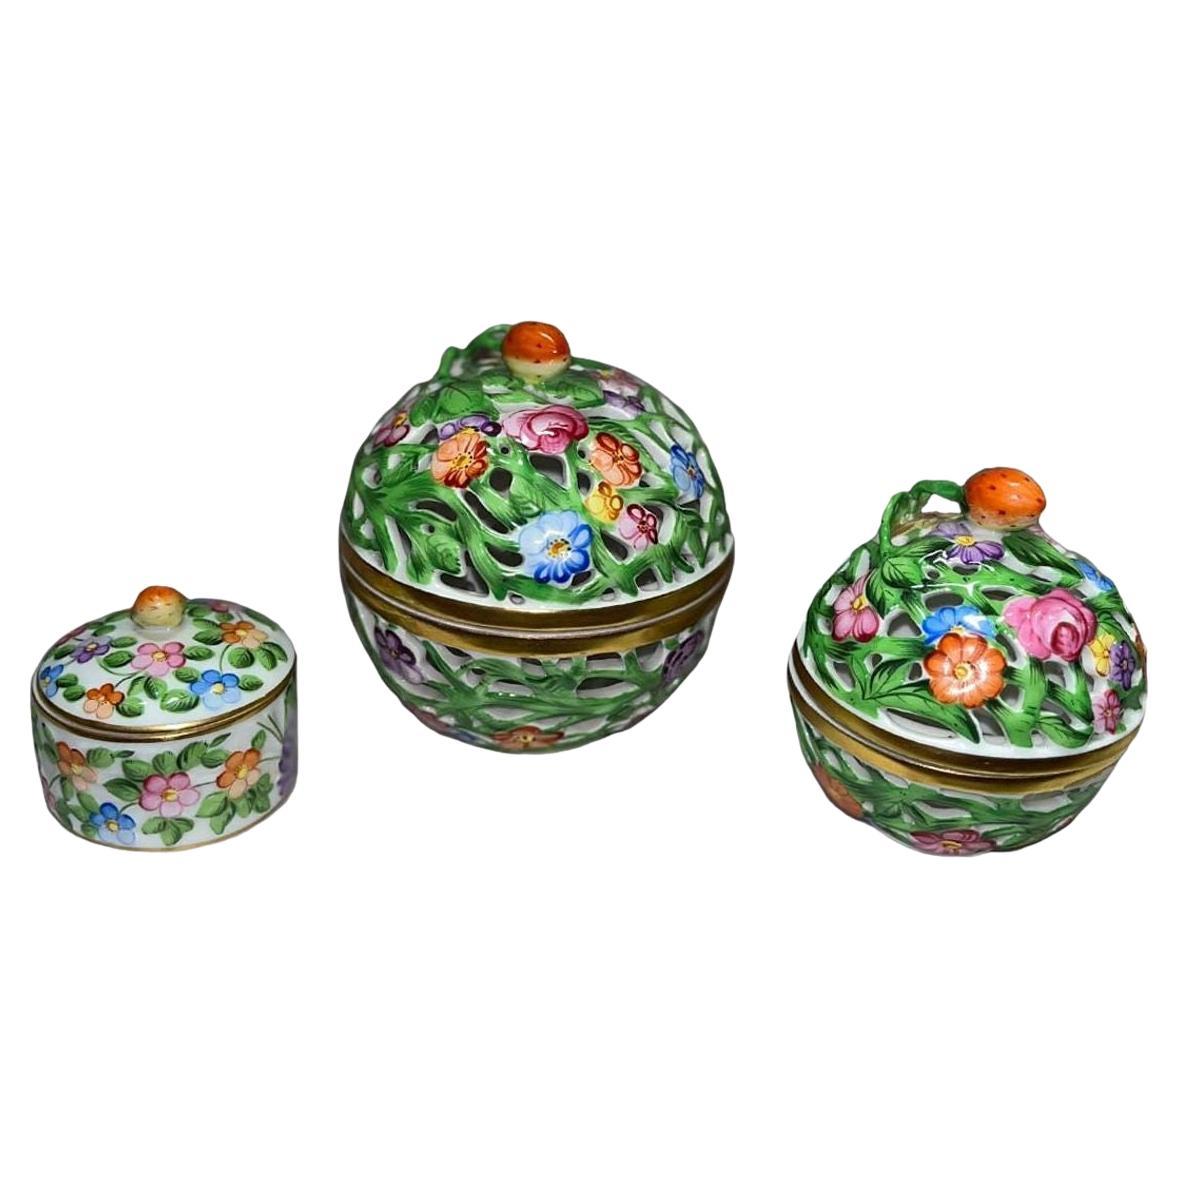 Herend Hungary Porcelain Box Set For Sale